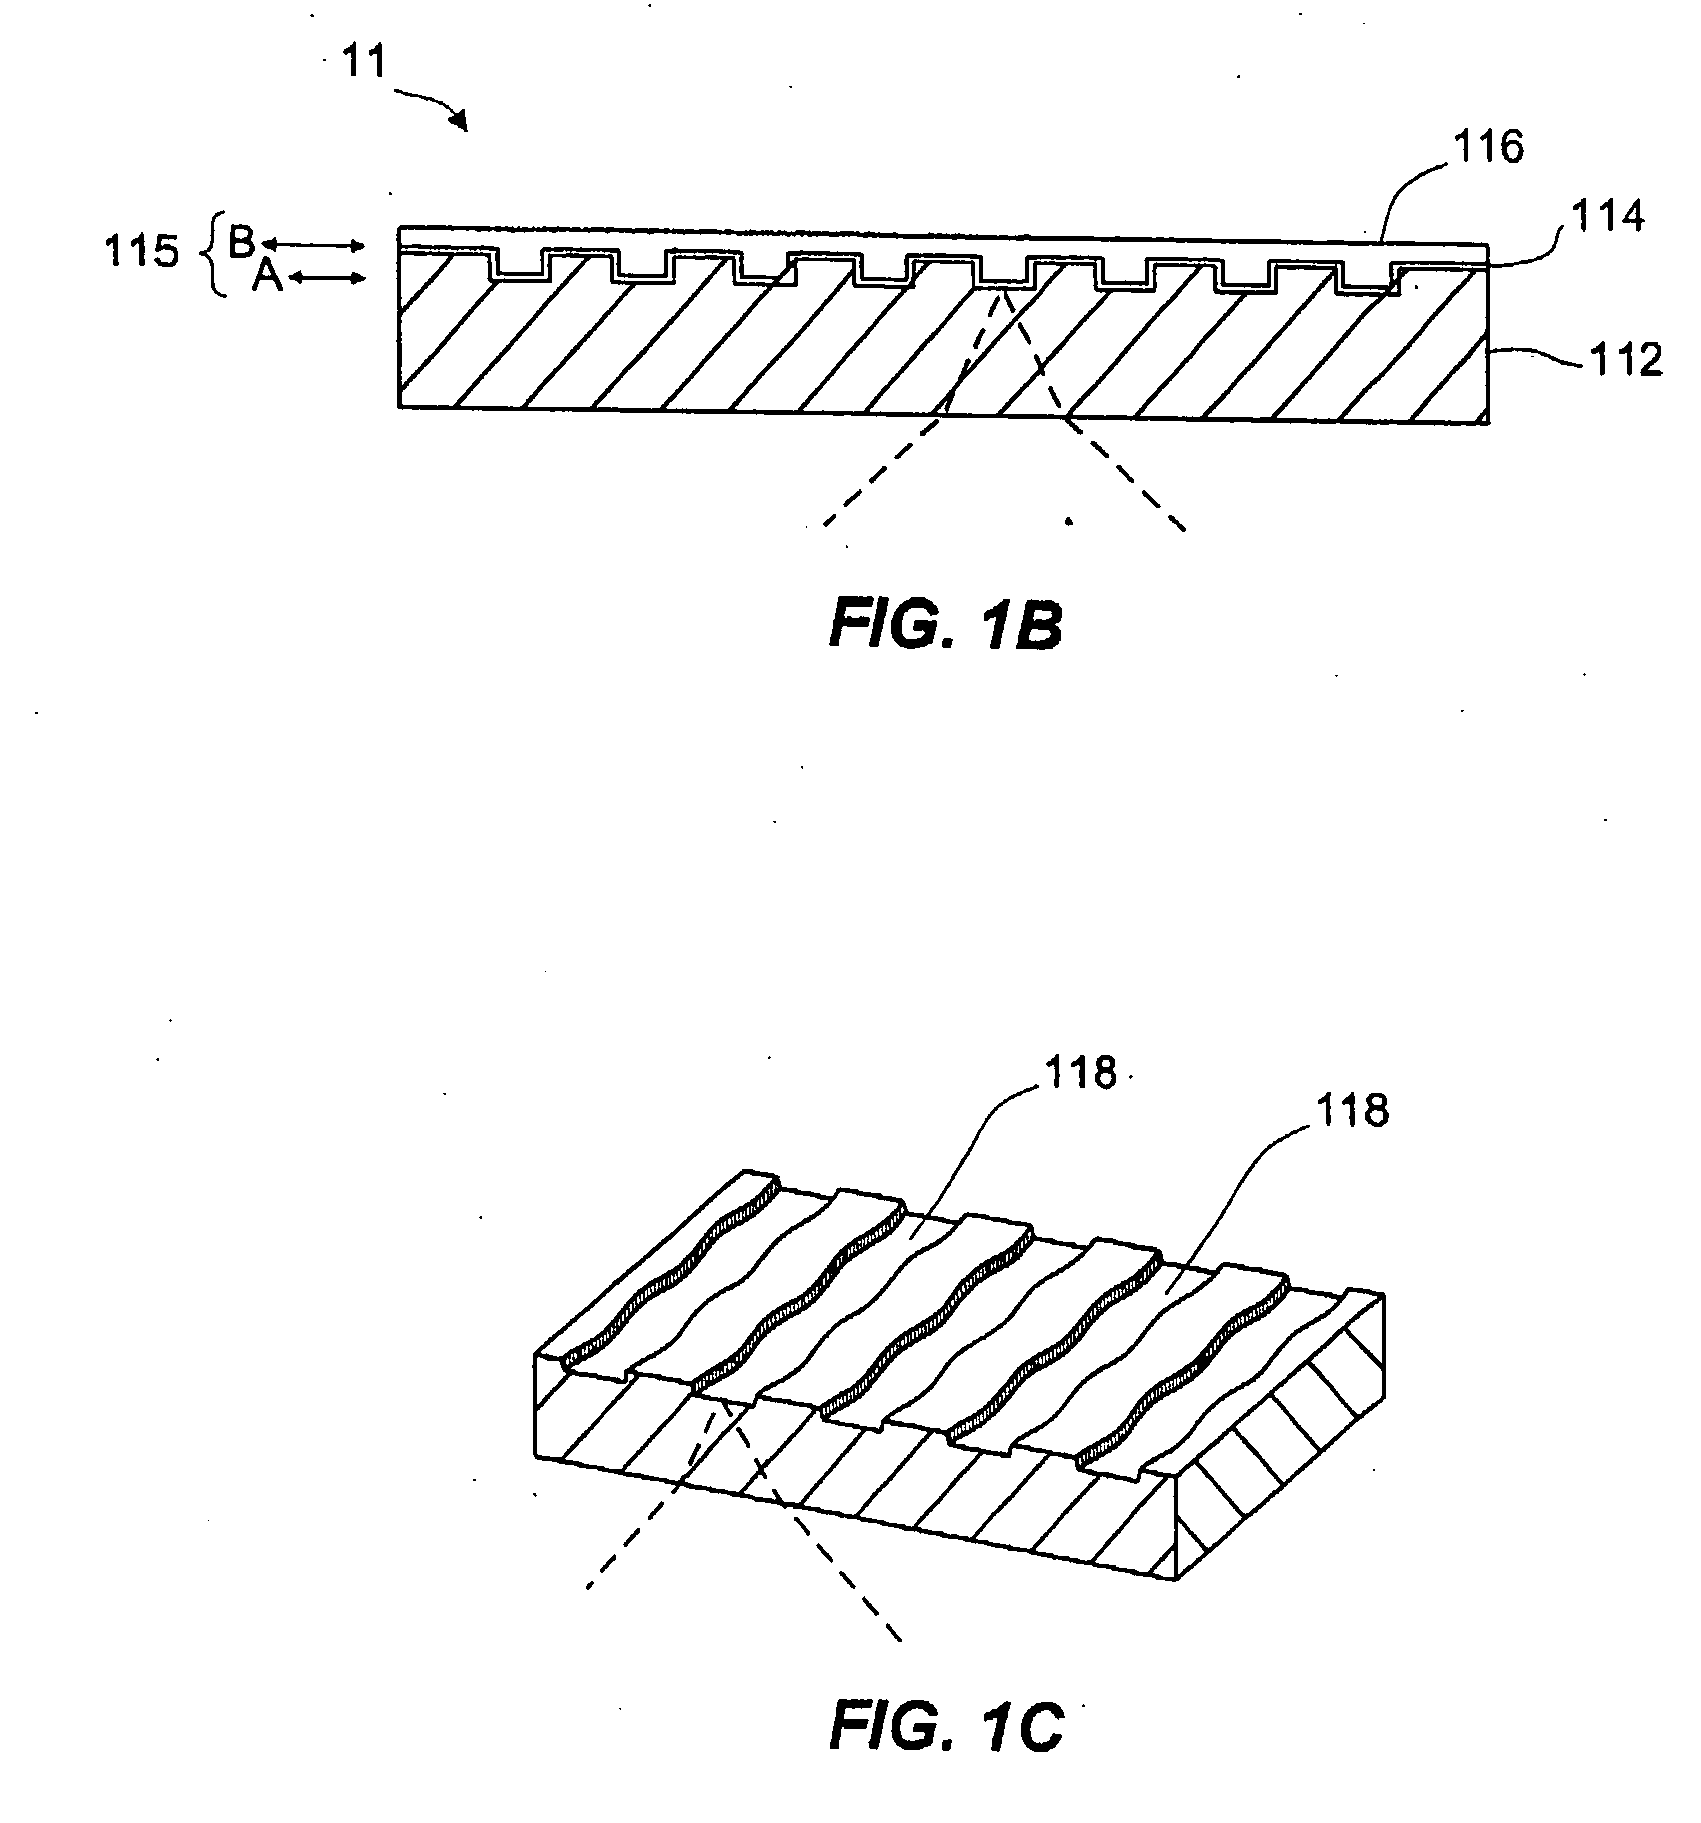 Trackable optical discs with concurrently readable analyte material